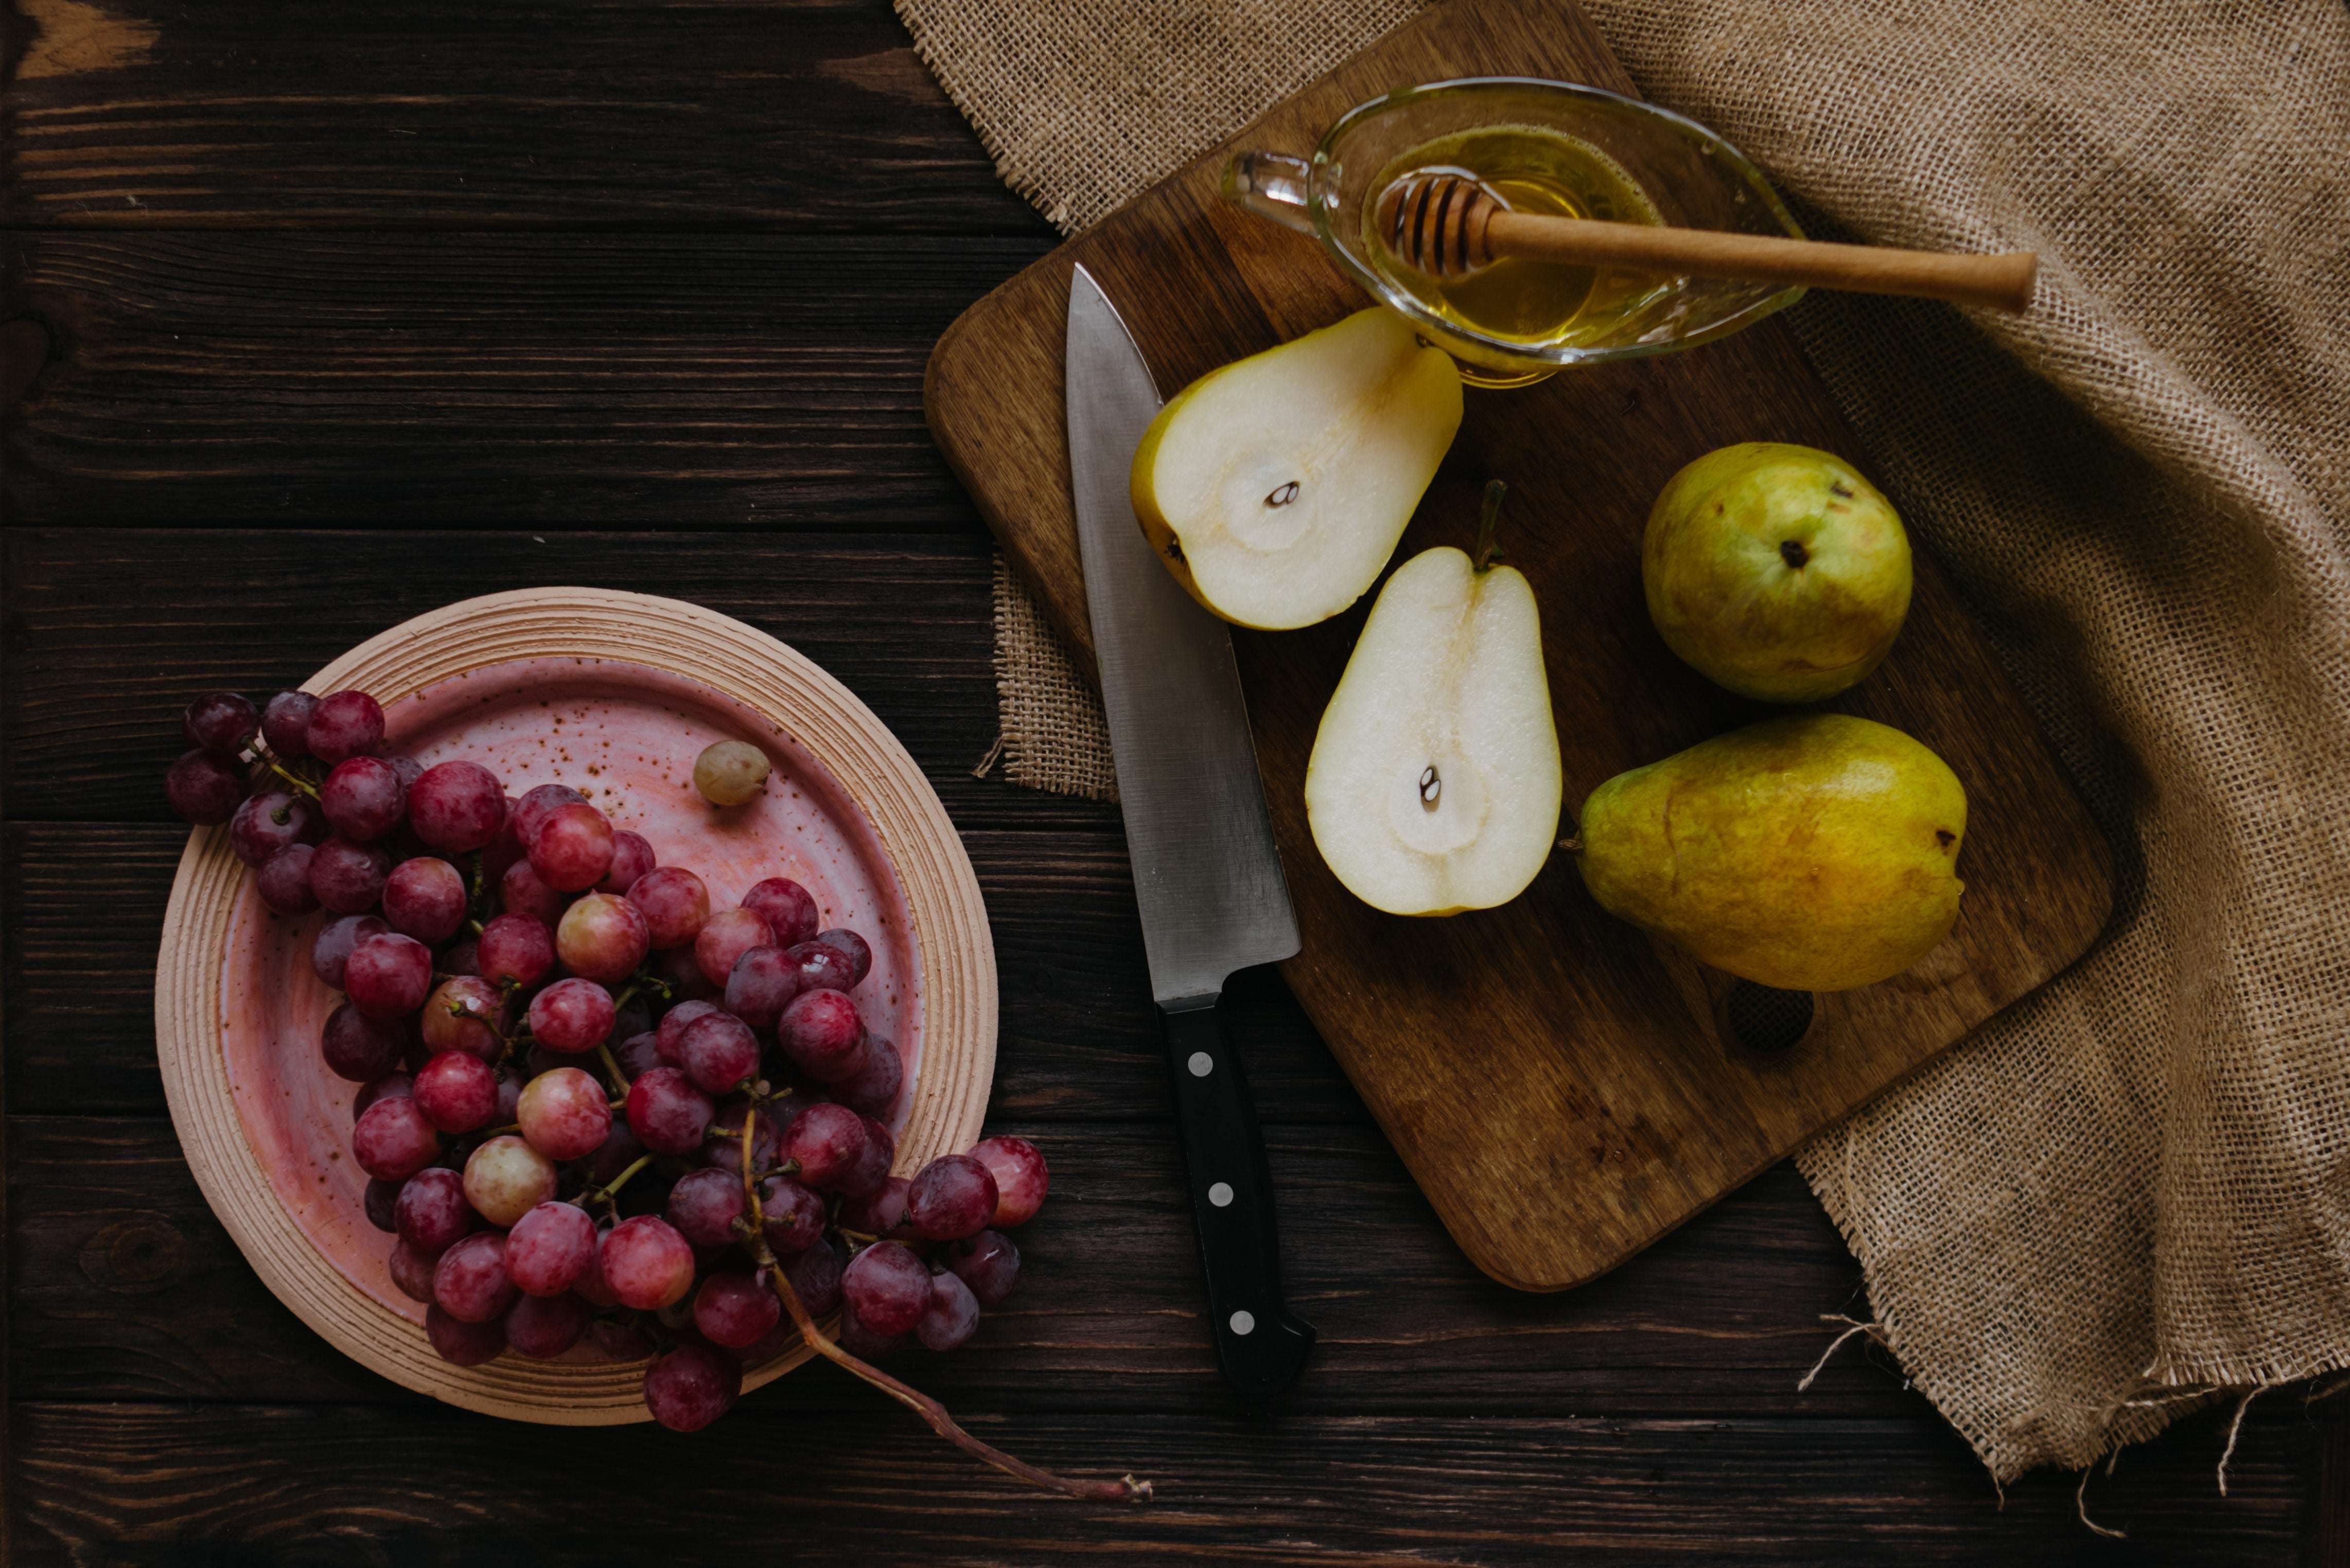 Pears, honey, and grapes on a wooden table